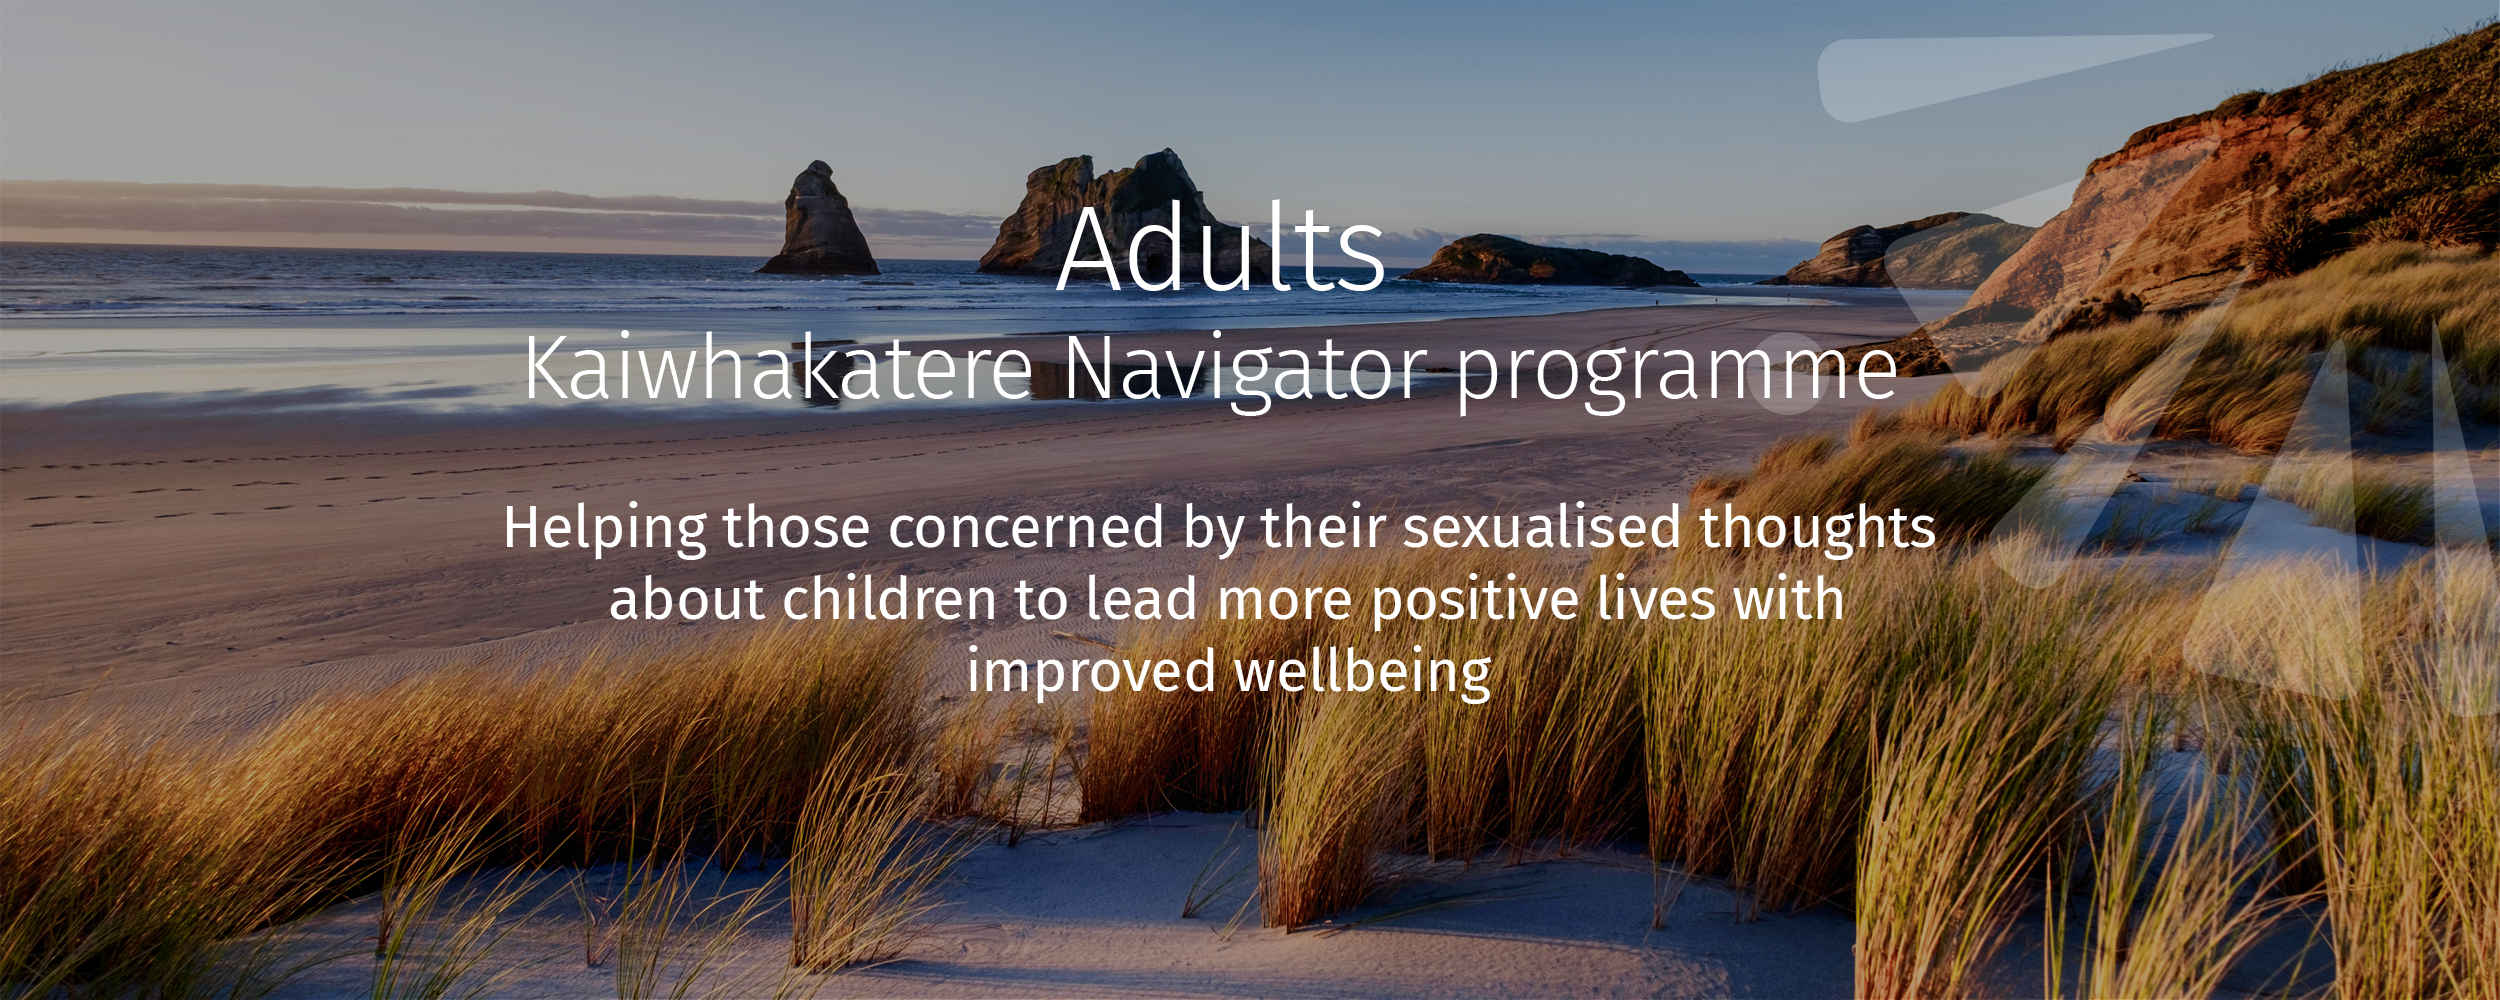 Helping those concerned by their sexualised thoughts about children to lead more positive lives with improved wellbeing